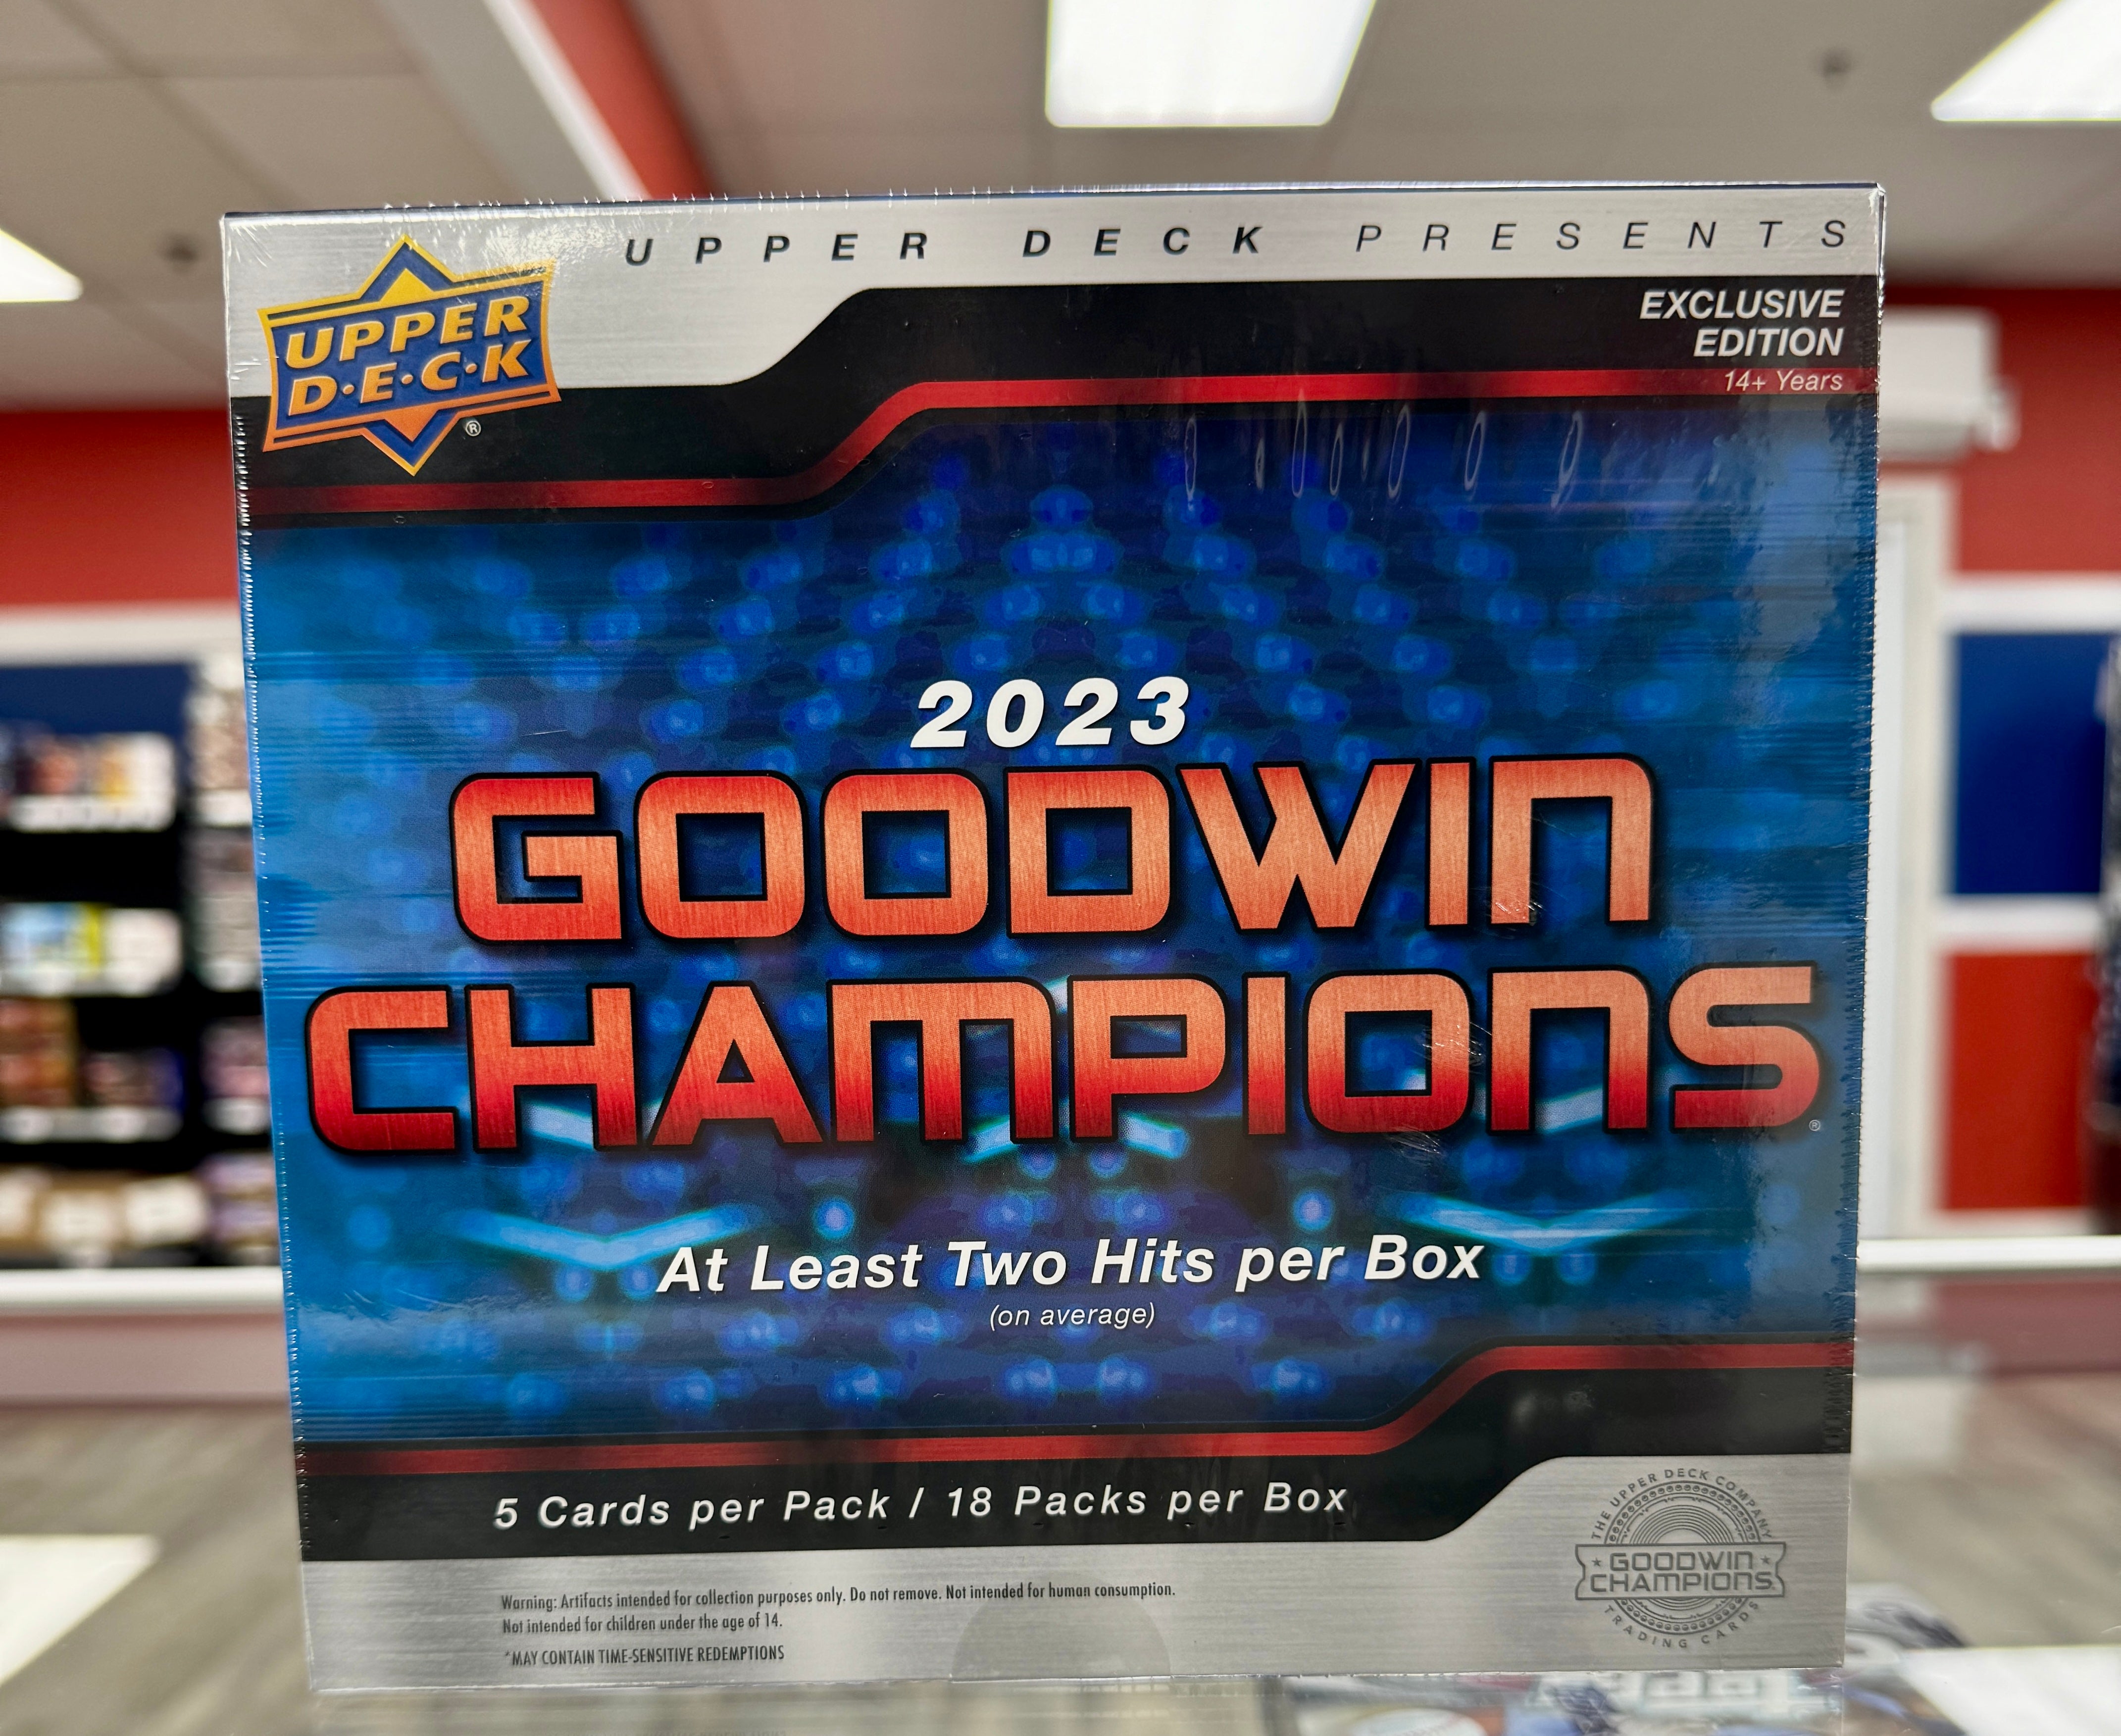 2023 Upper Deck Goodwin Champions Exclusive Edition Hobby Box - Miraj Trading